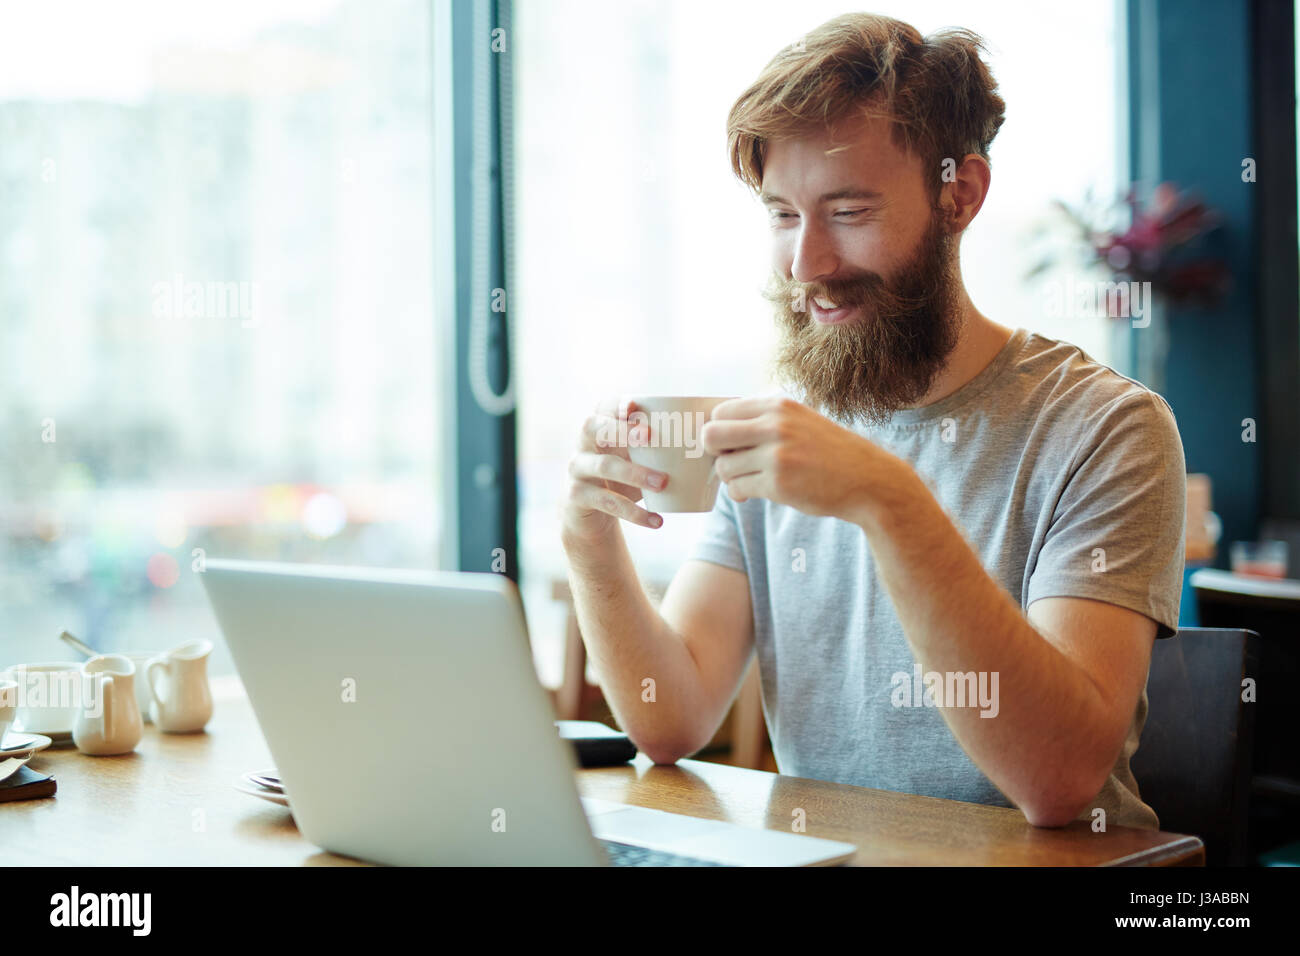 Handsome Businessman Using Laptop in Cafe Stock Photo